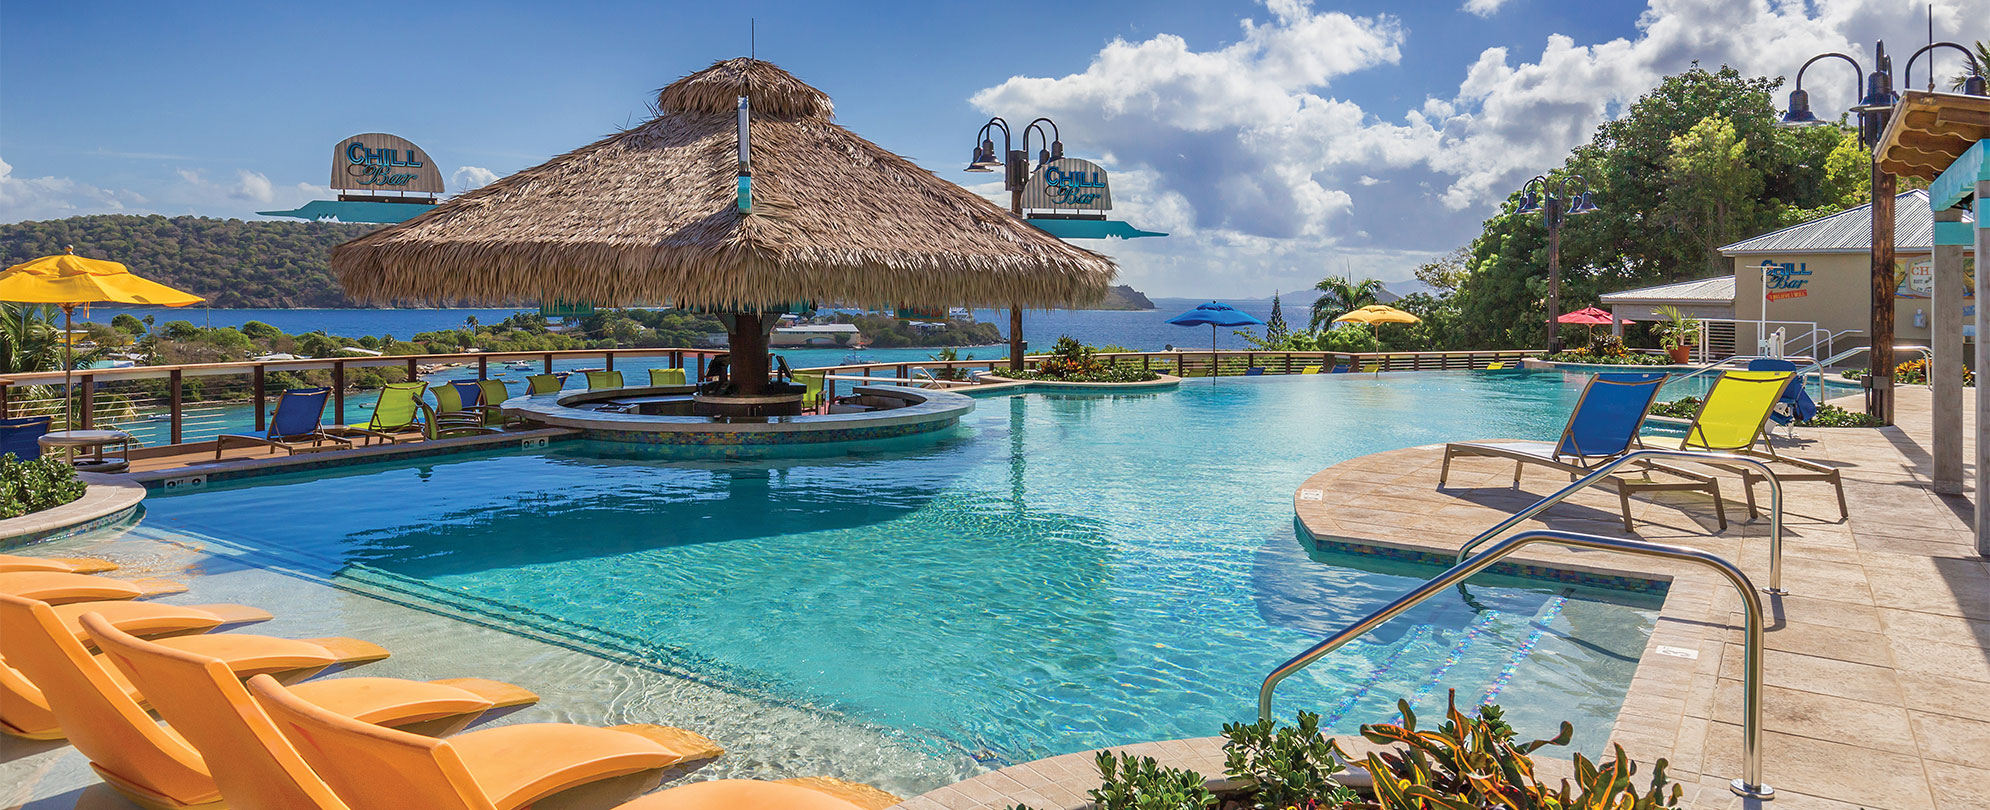 A Margaritaville Vacation Club resort pool area and tiki bar. 